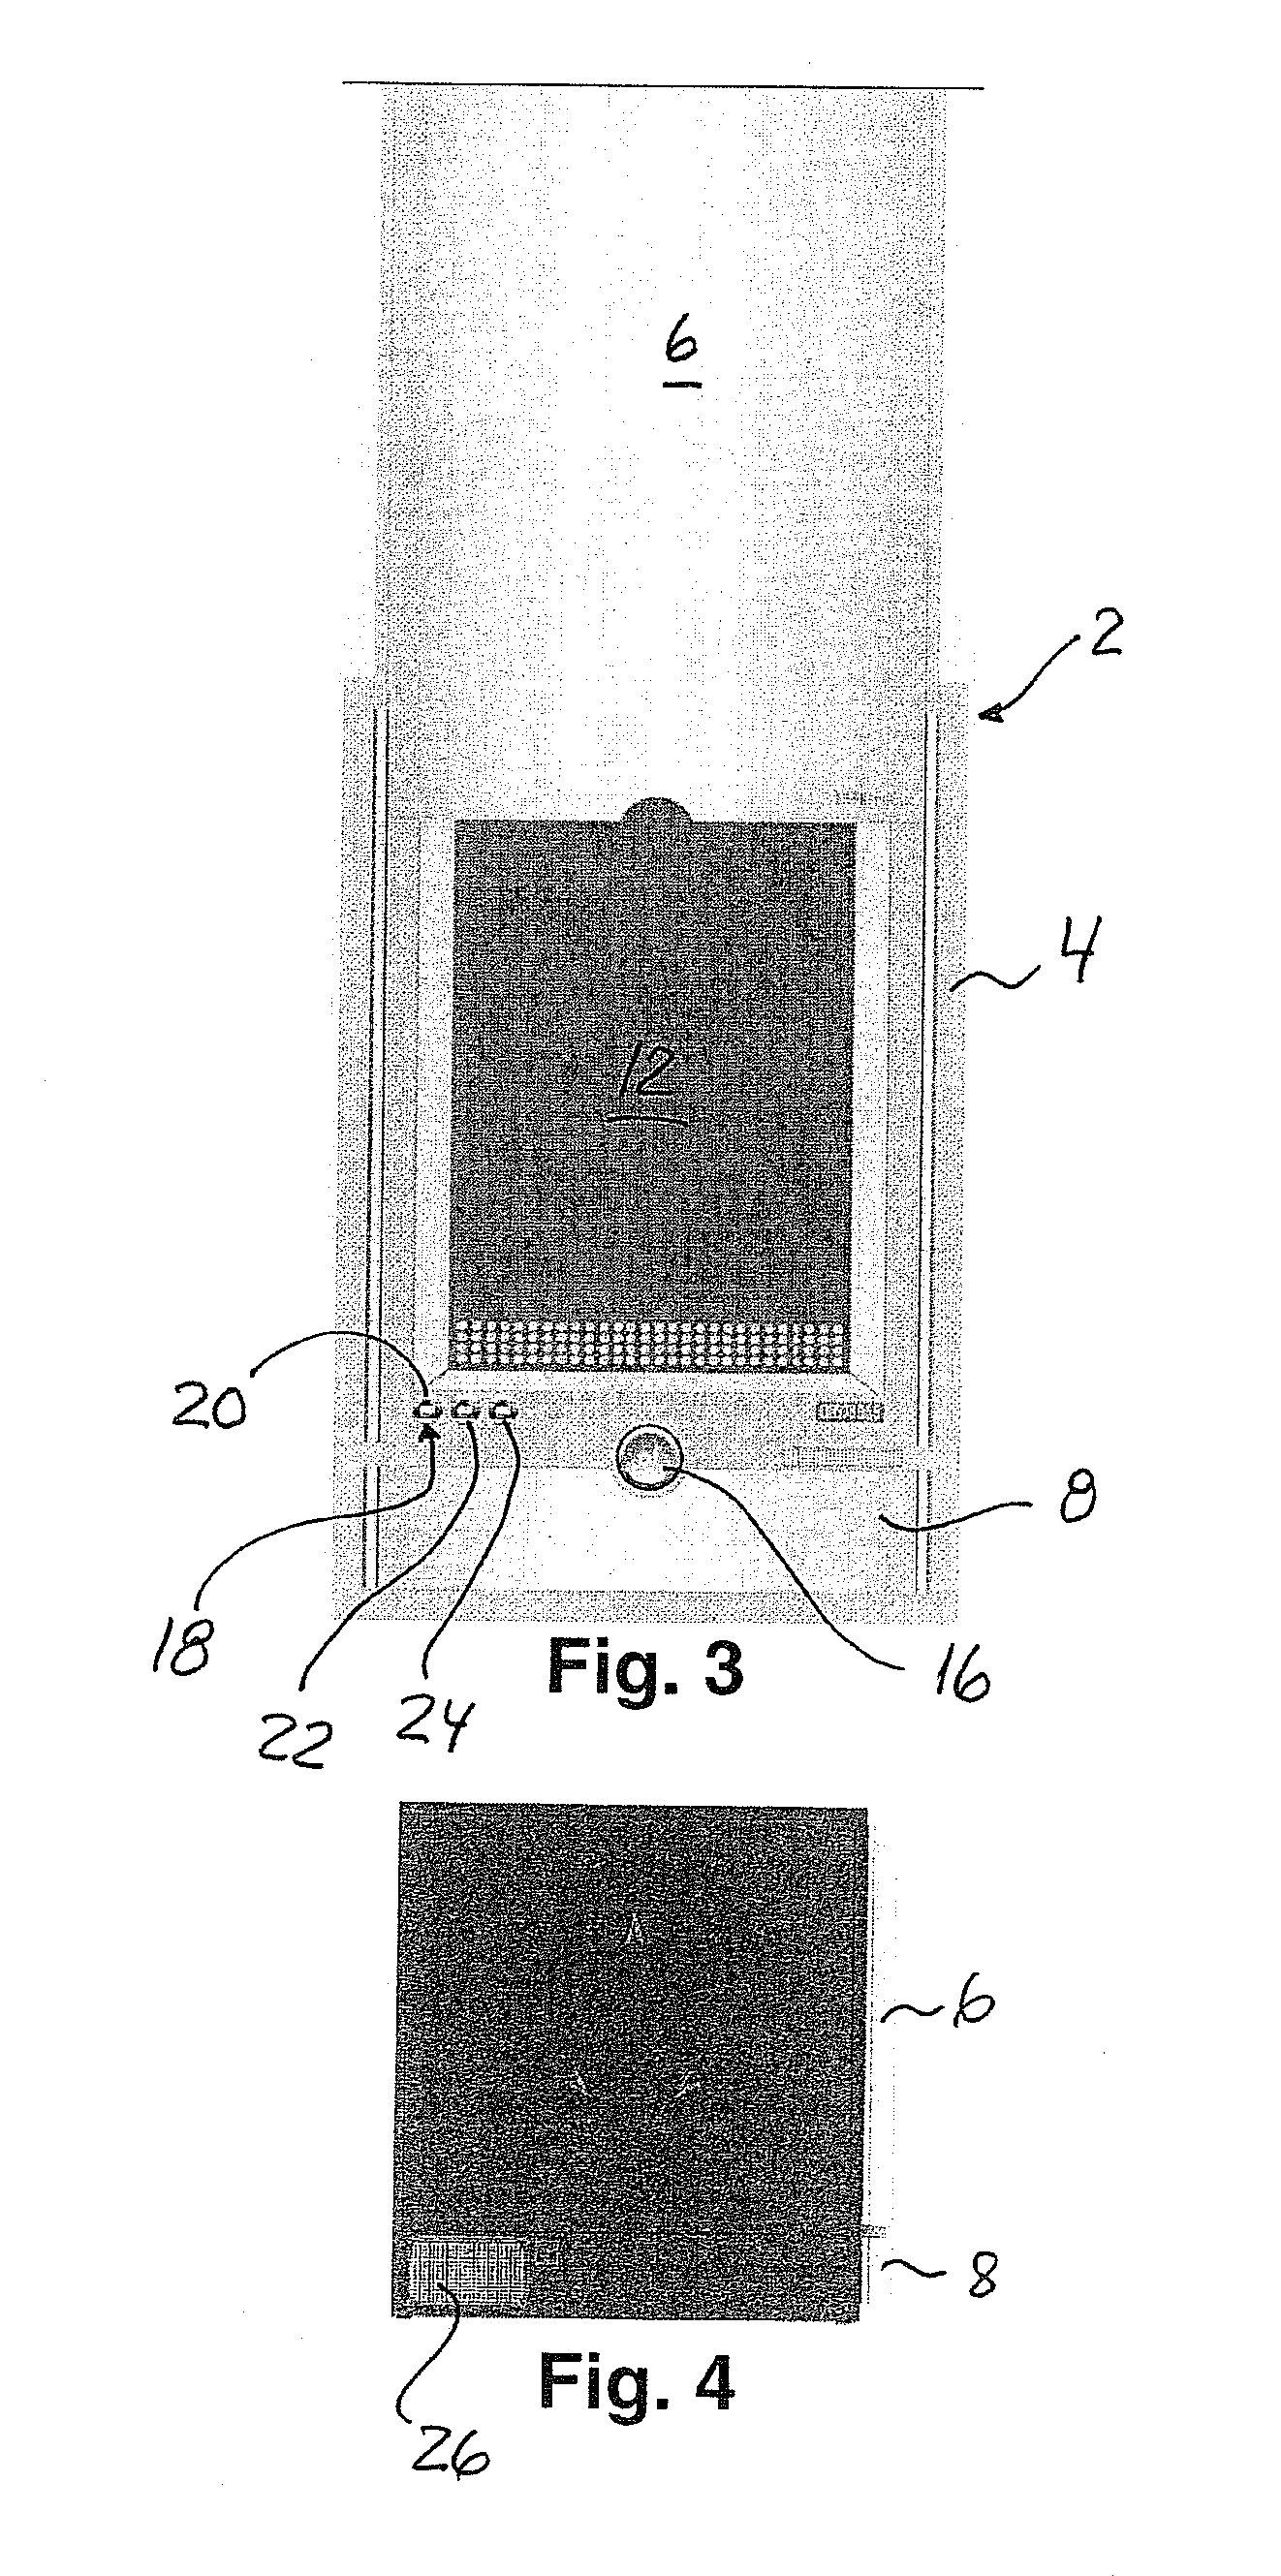 Method and apparatus for impregnation of items